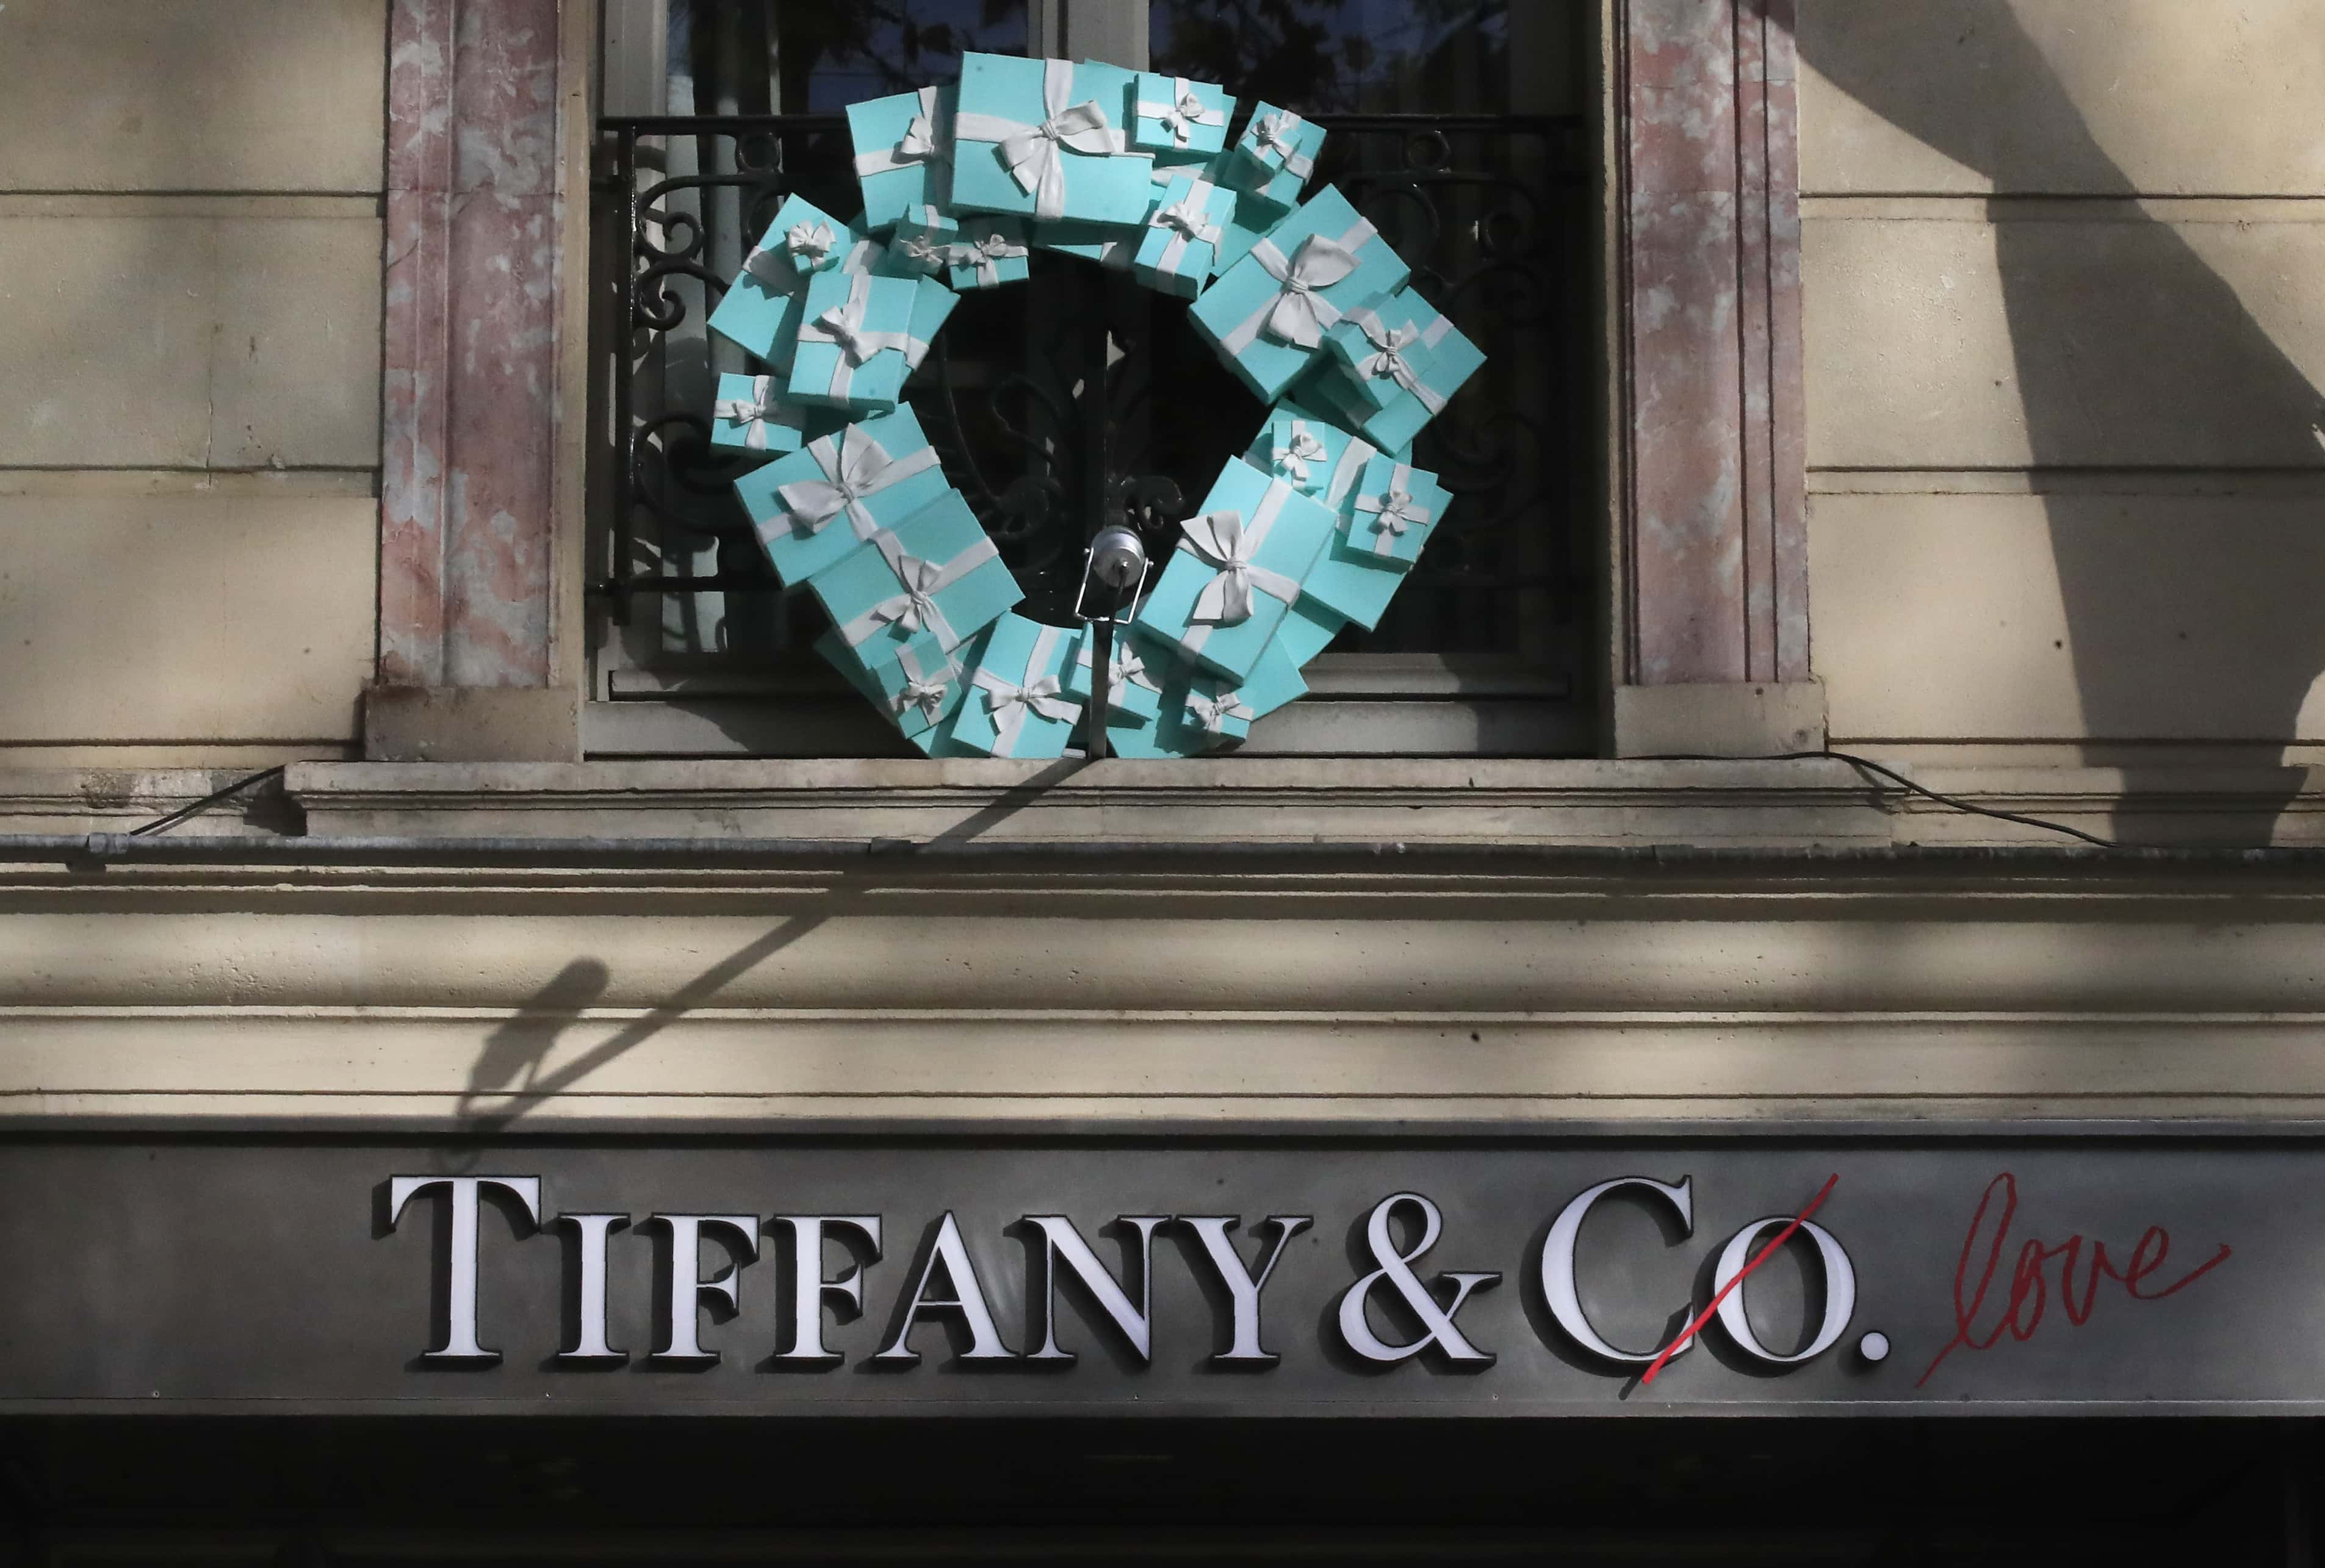 Louis Vuitton owner LVMH to buy US iconic jeweller Tiffany for $16.2 bn